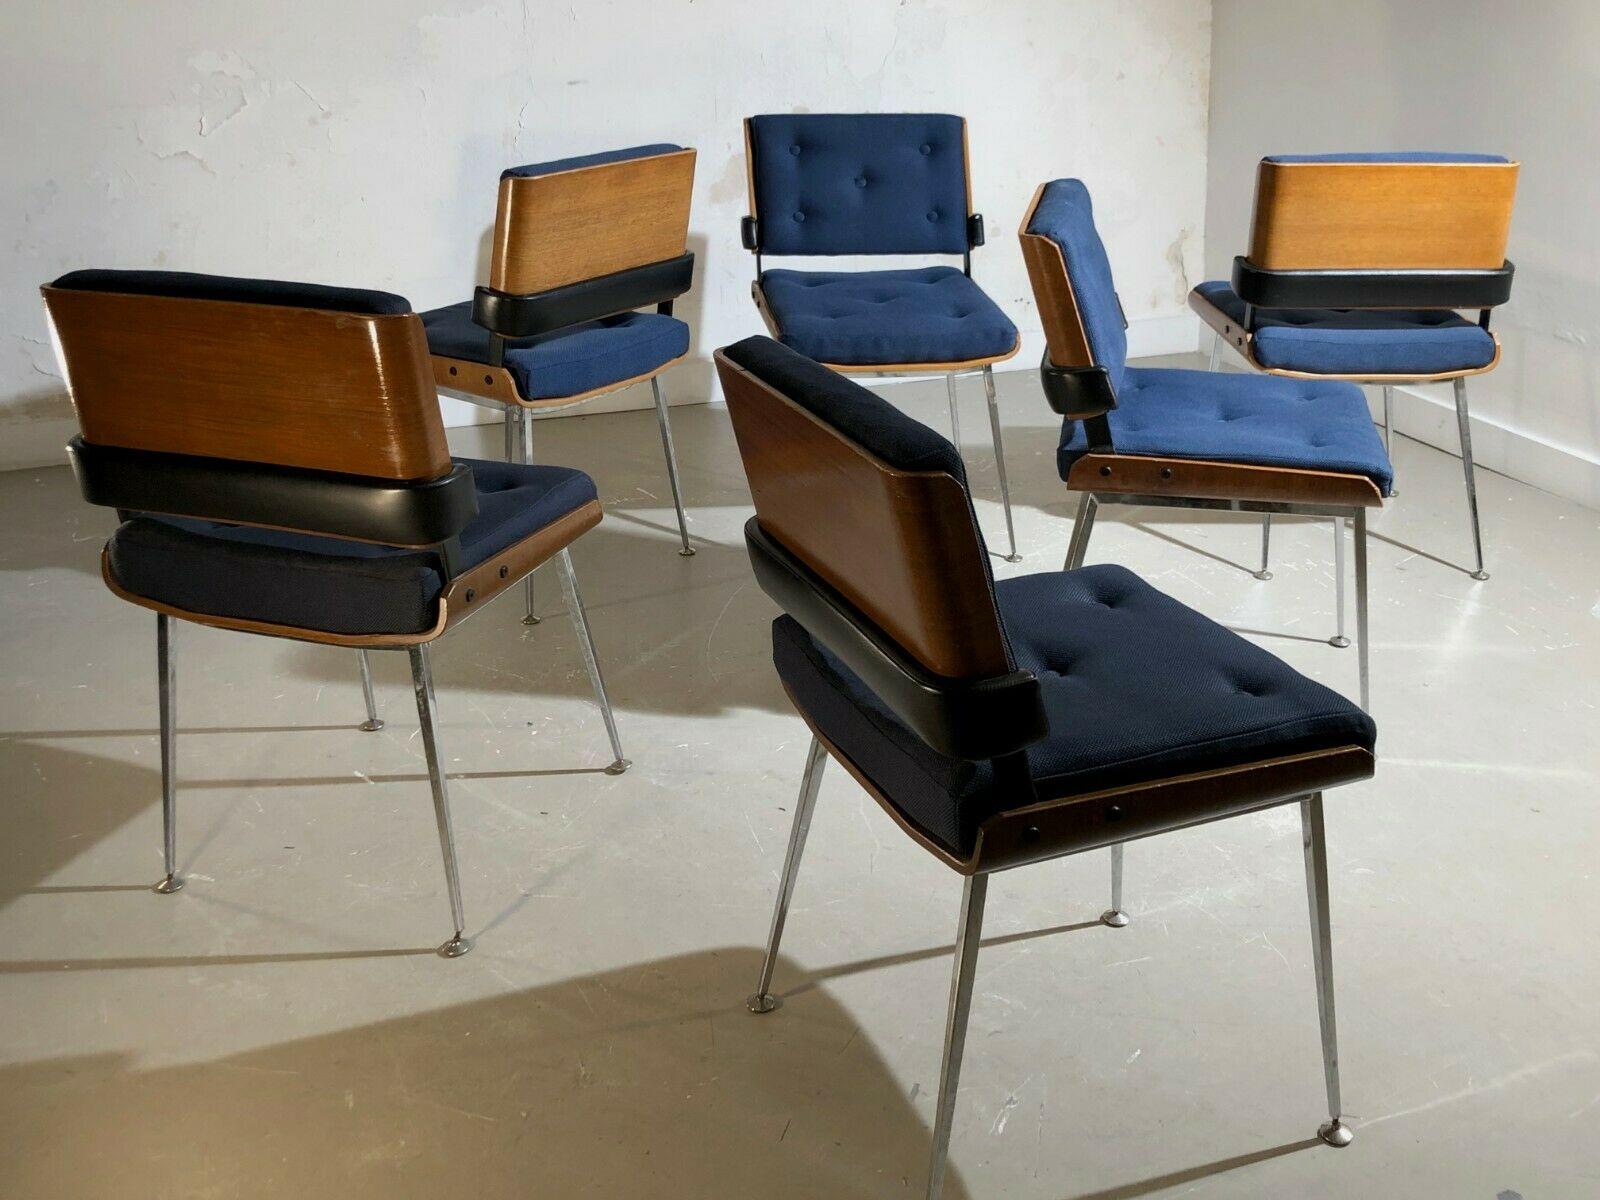 Metal A Set of 6 MID-CENTURY-MODERN SPACE-AGE Chairs by ALAIN RICHARD, France, 1950 For Sale